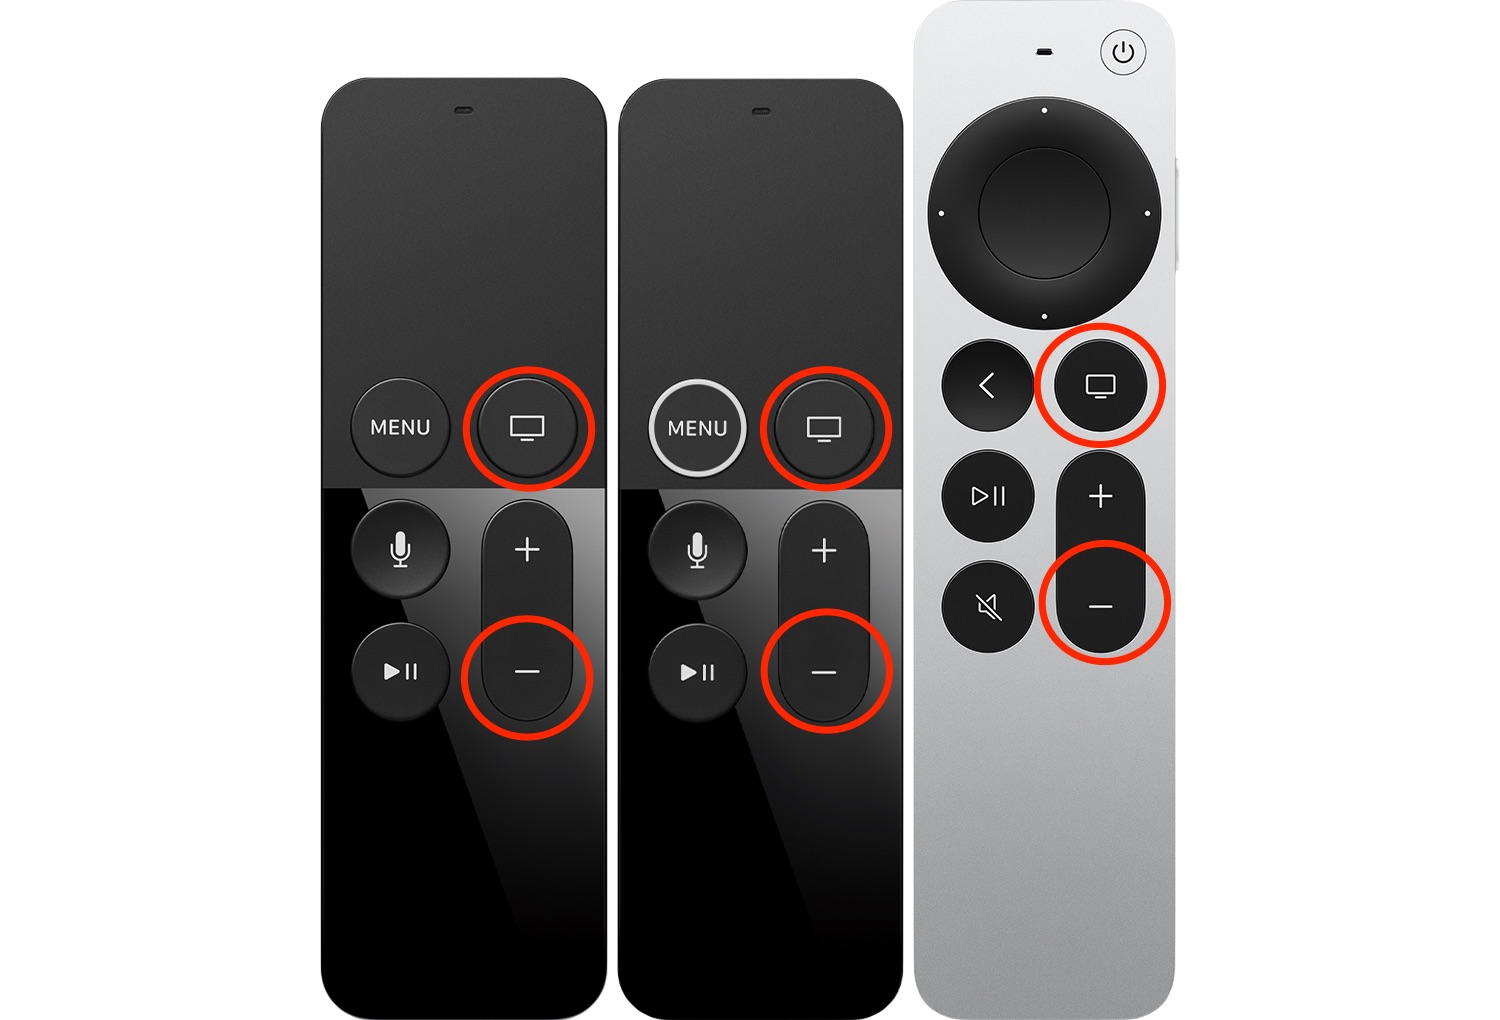 Hen imod undergrundsbane Nervesammenbrud How To Fix Things When Your Siri Remote Becomes Unresponsive